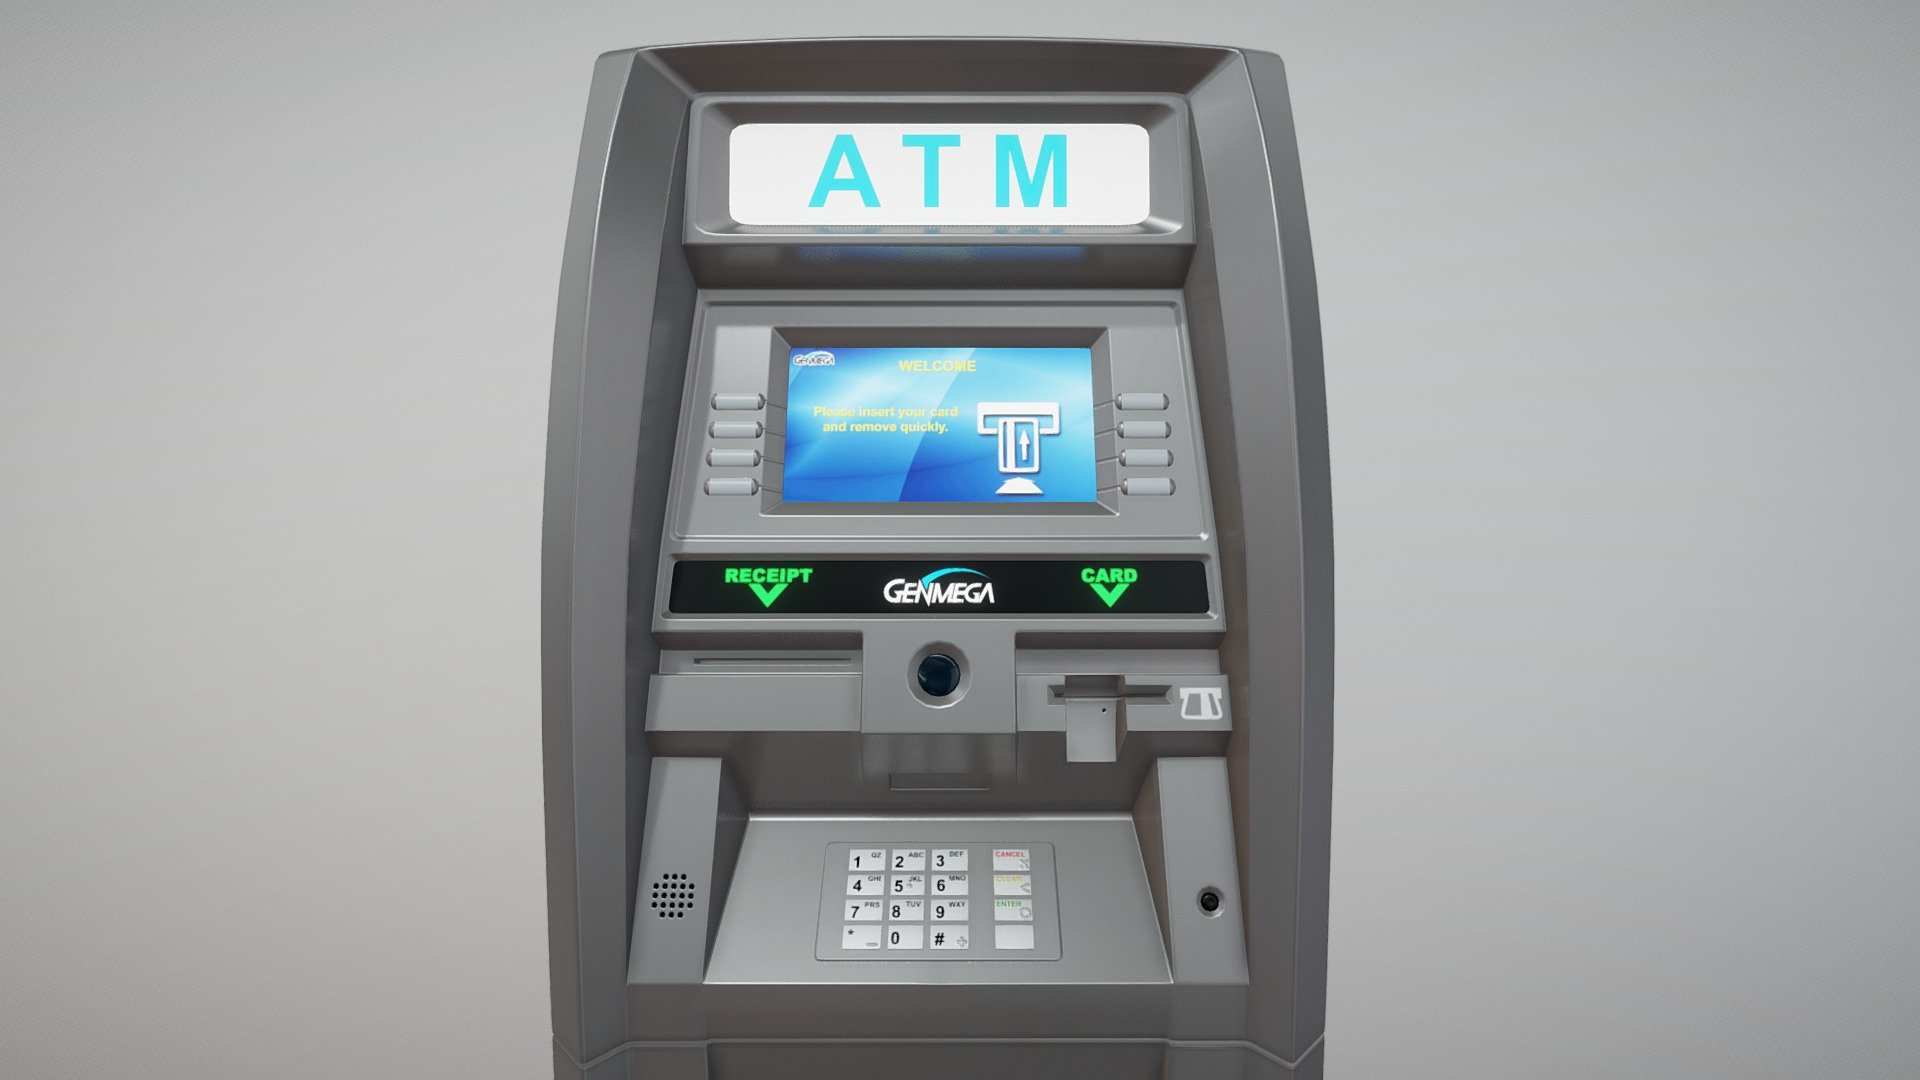 ATM model
VR and game ready for high quality Architectural Visualization - ATM model - Buy Royalty Free 3D model by InvrsionAdmin 3d model